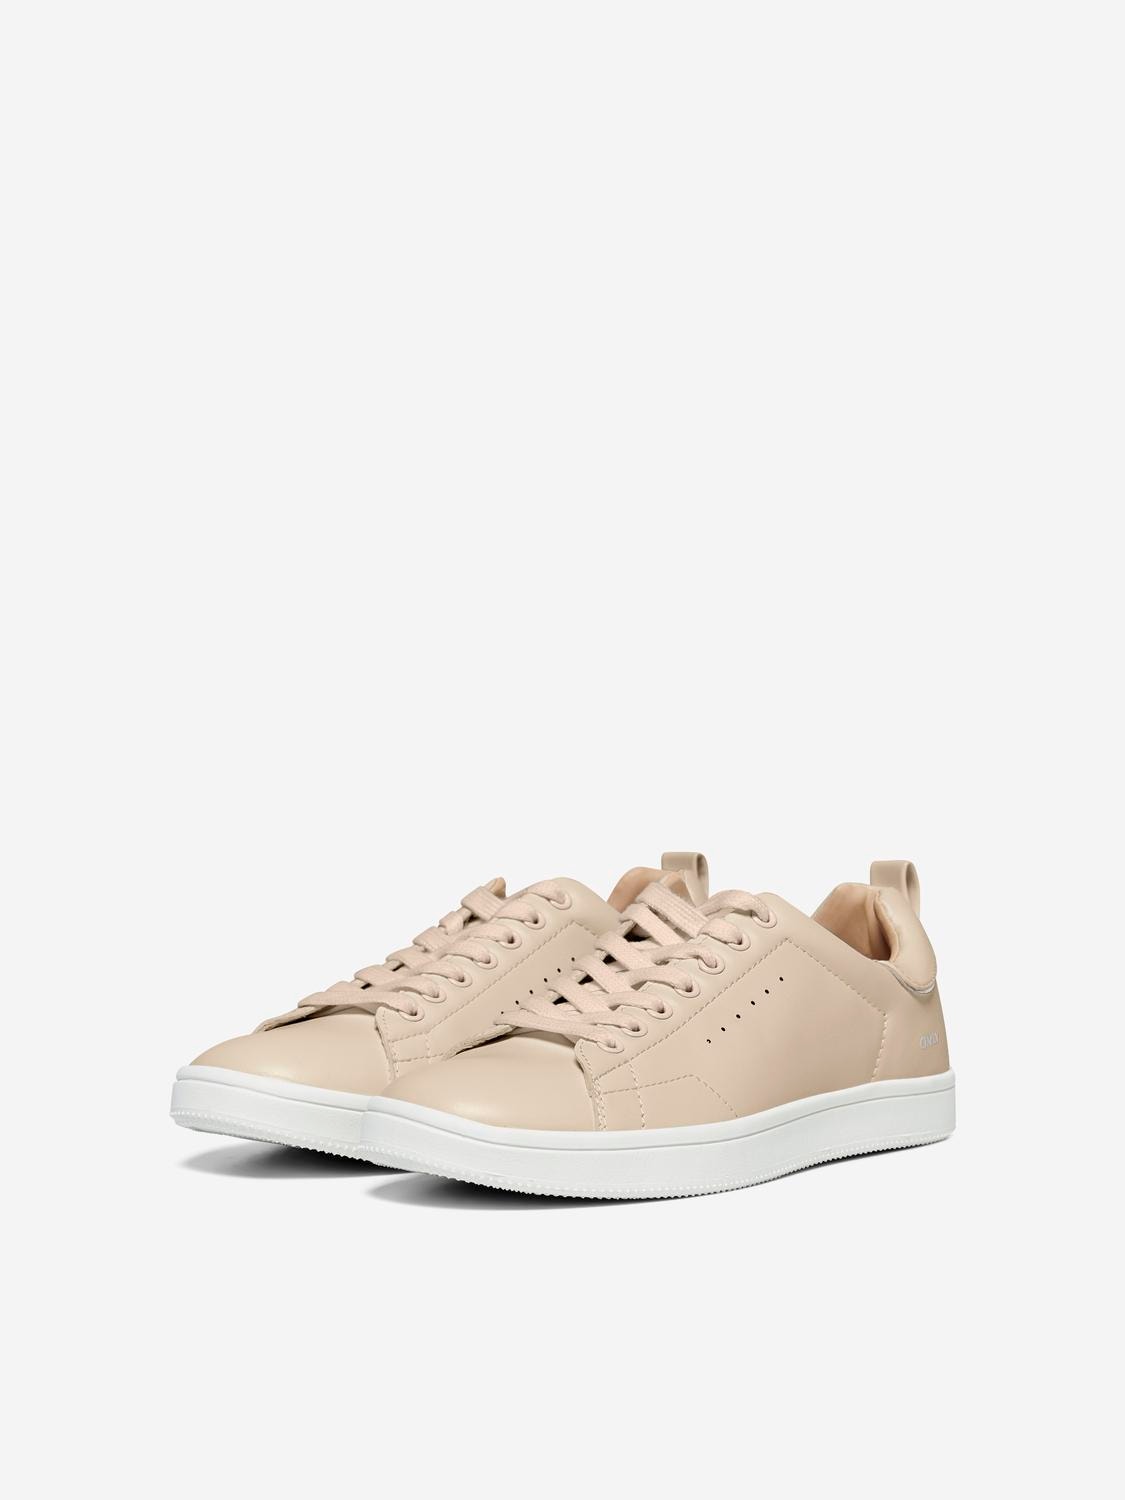 ONLY Leather look Sneakers -Blush - 15184294